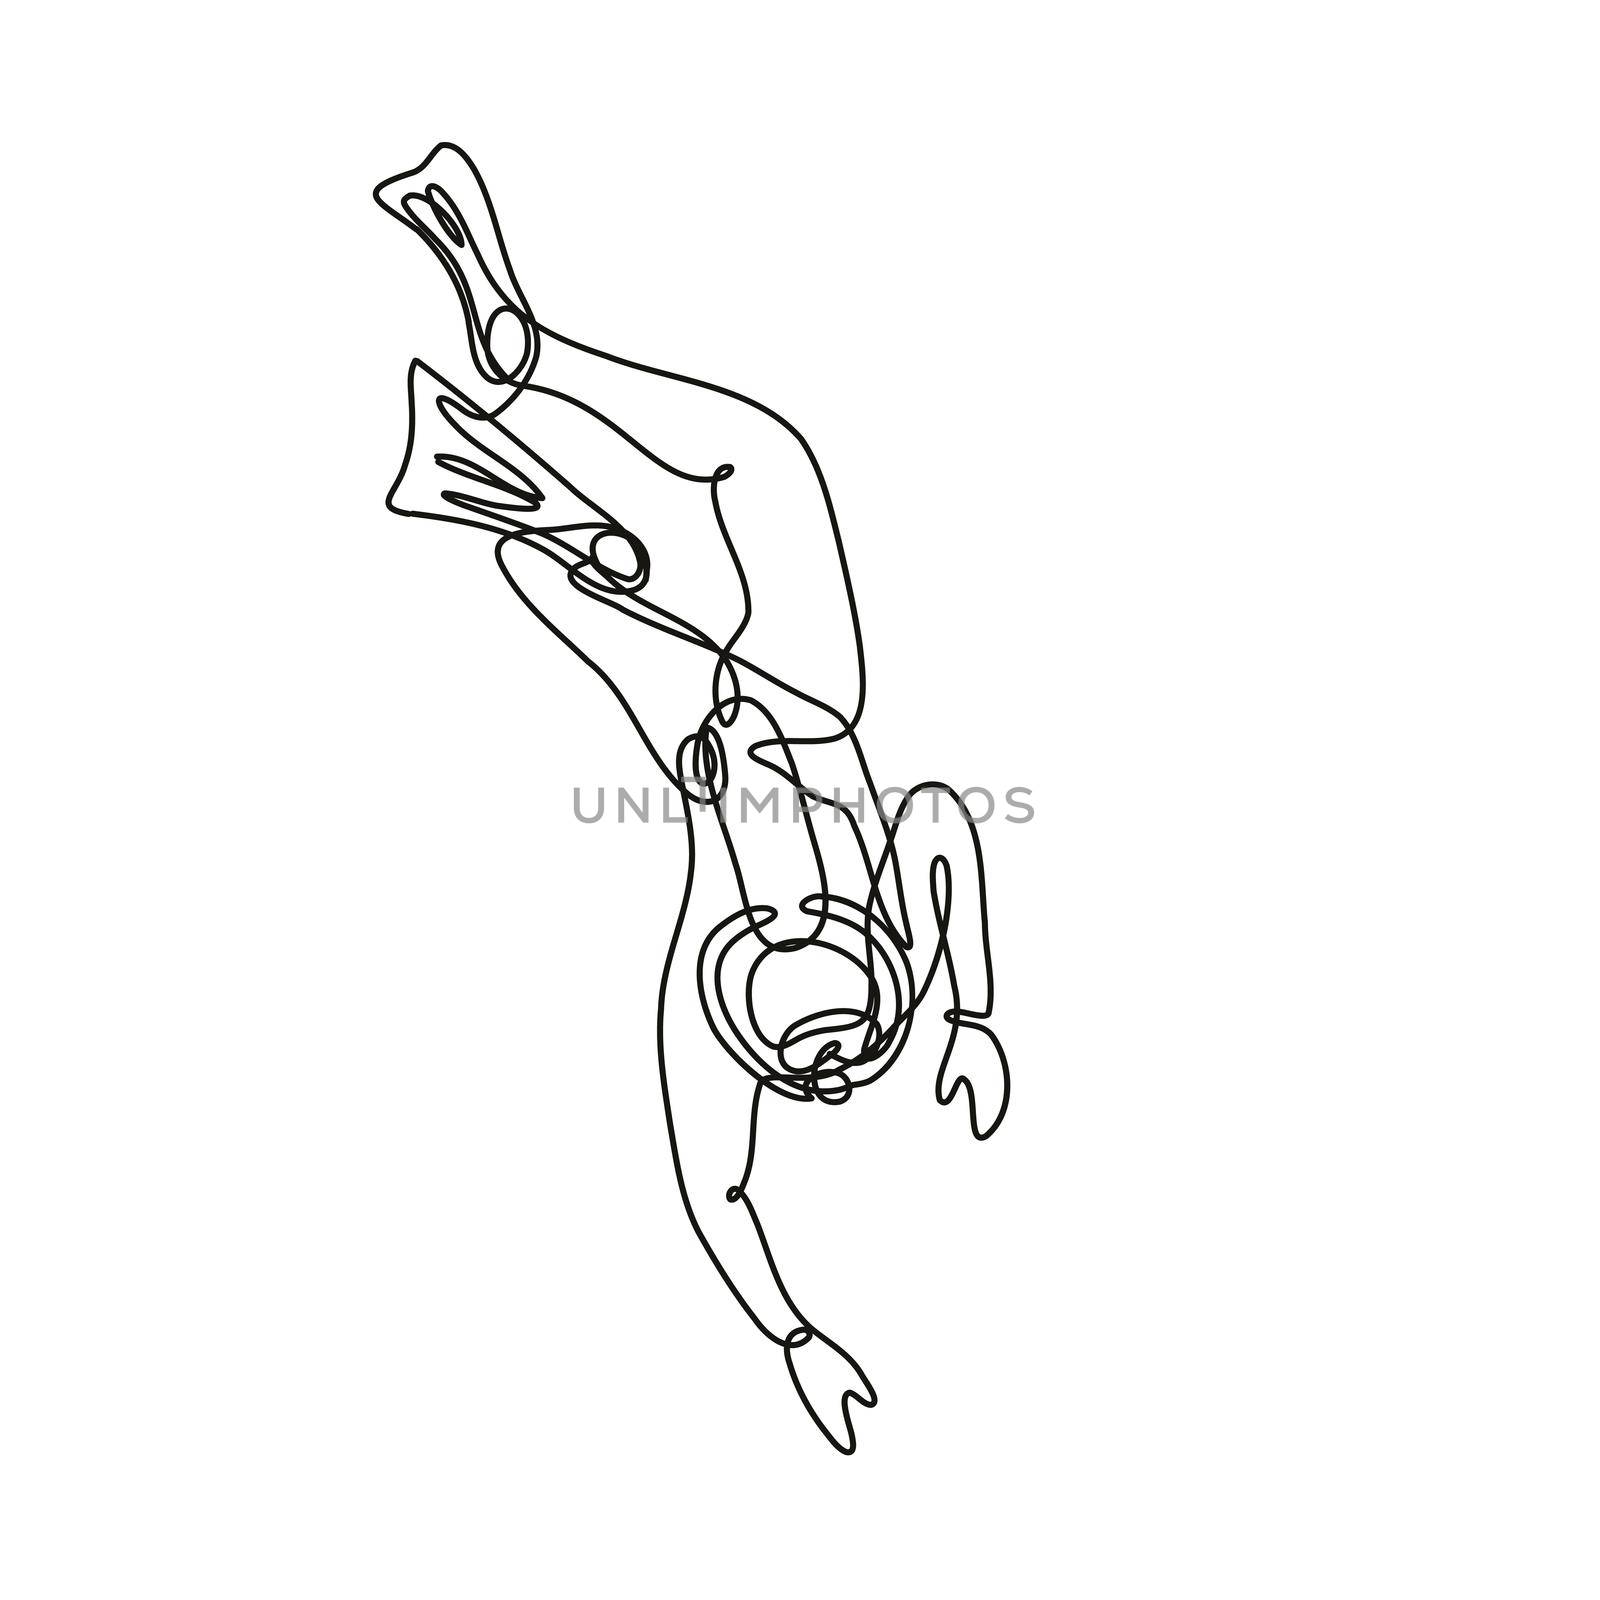 Continuous line drawing illustration of a scuba diver diving down done in mono line or doodle style in black and white on isolated background. 